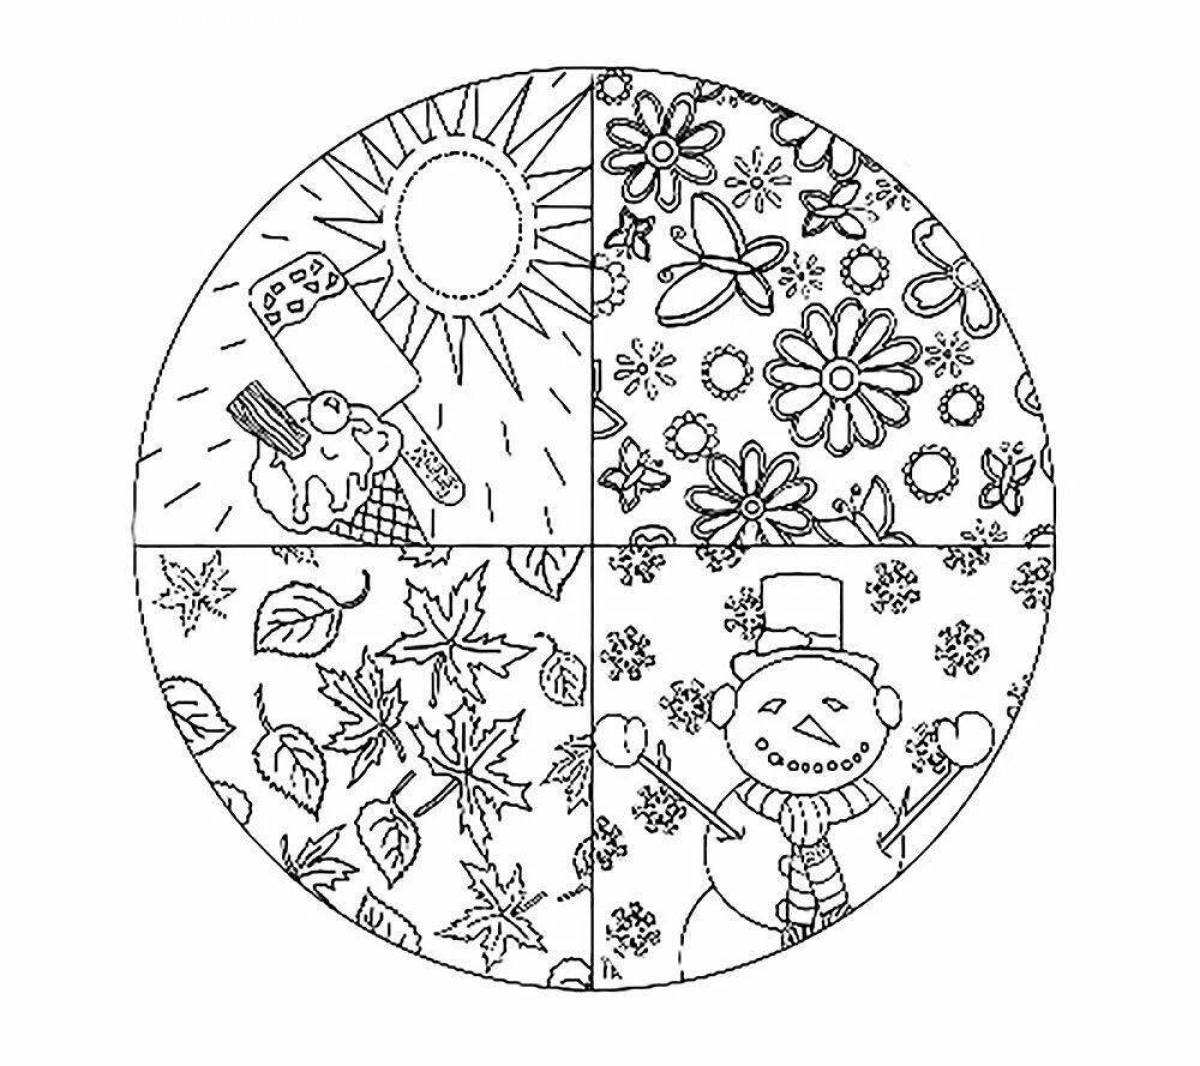 Shining autumn coloring pages for kids